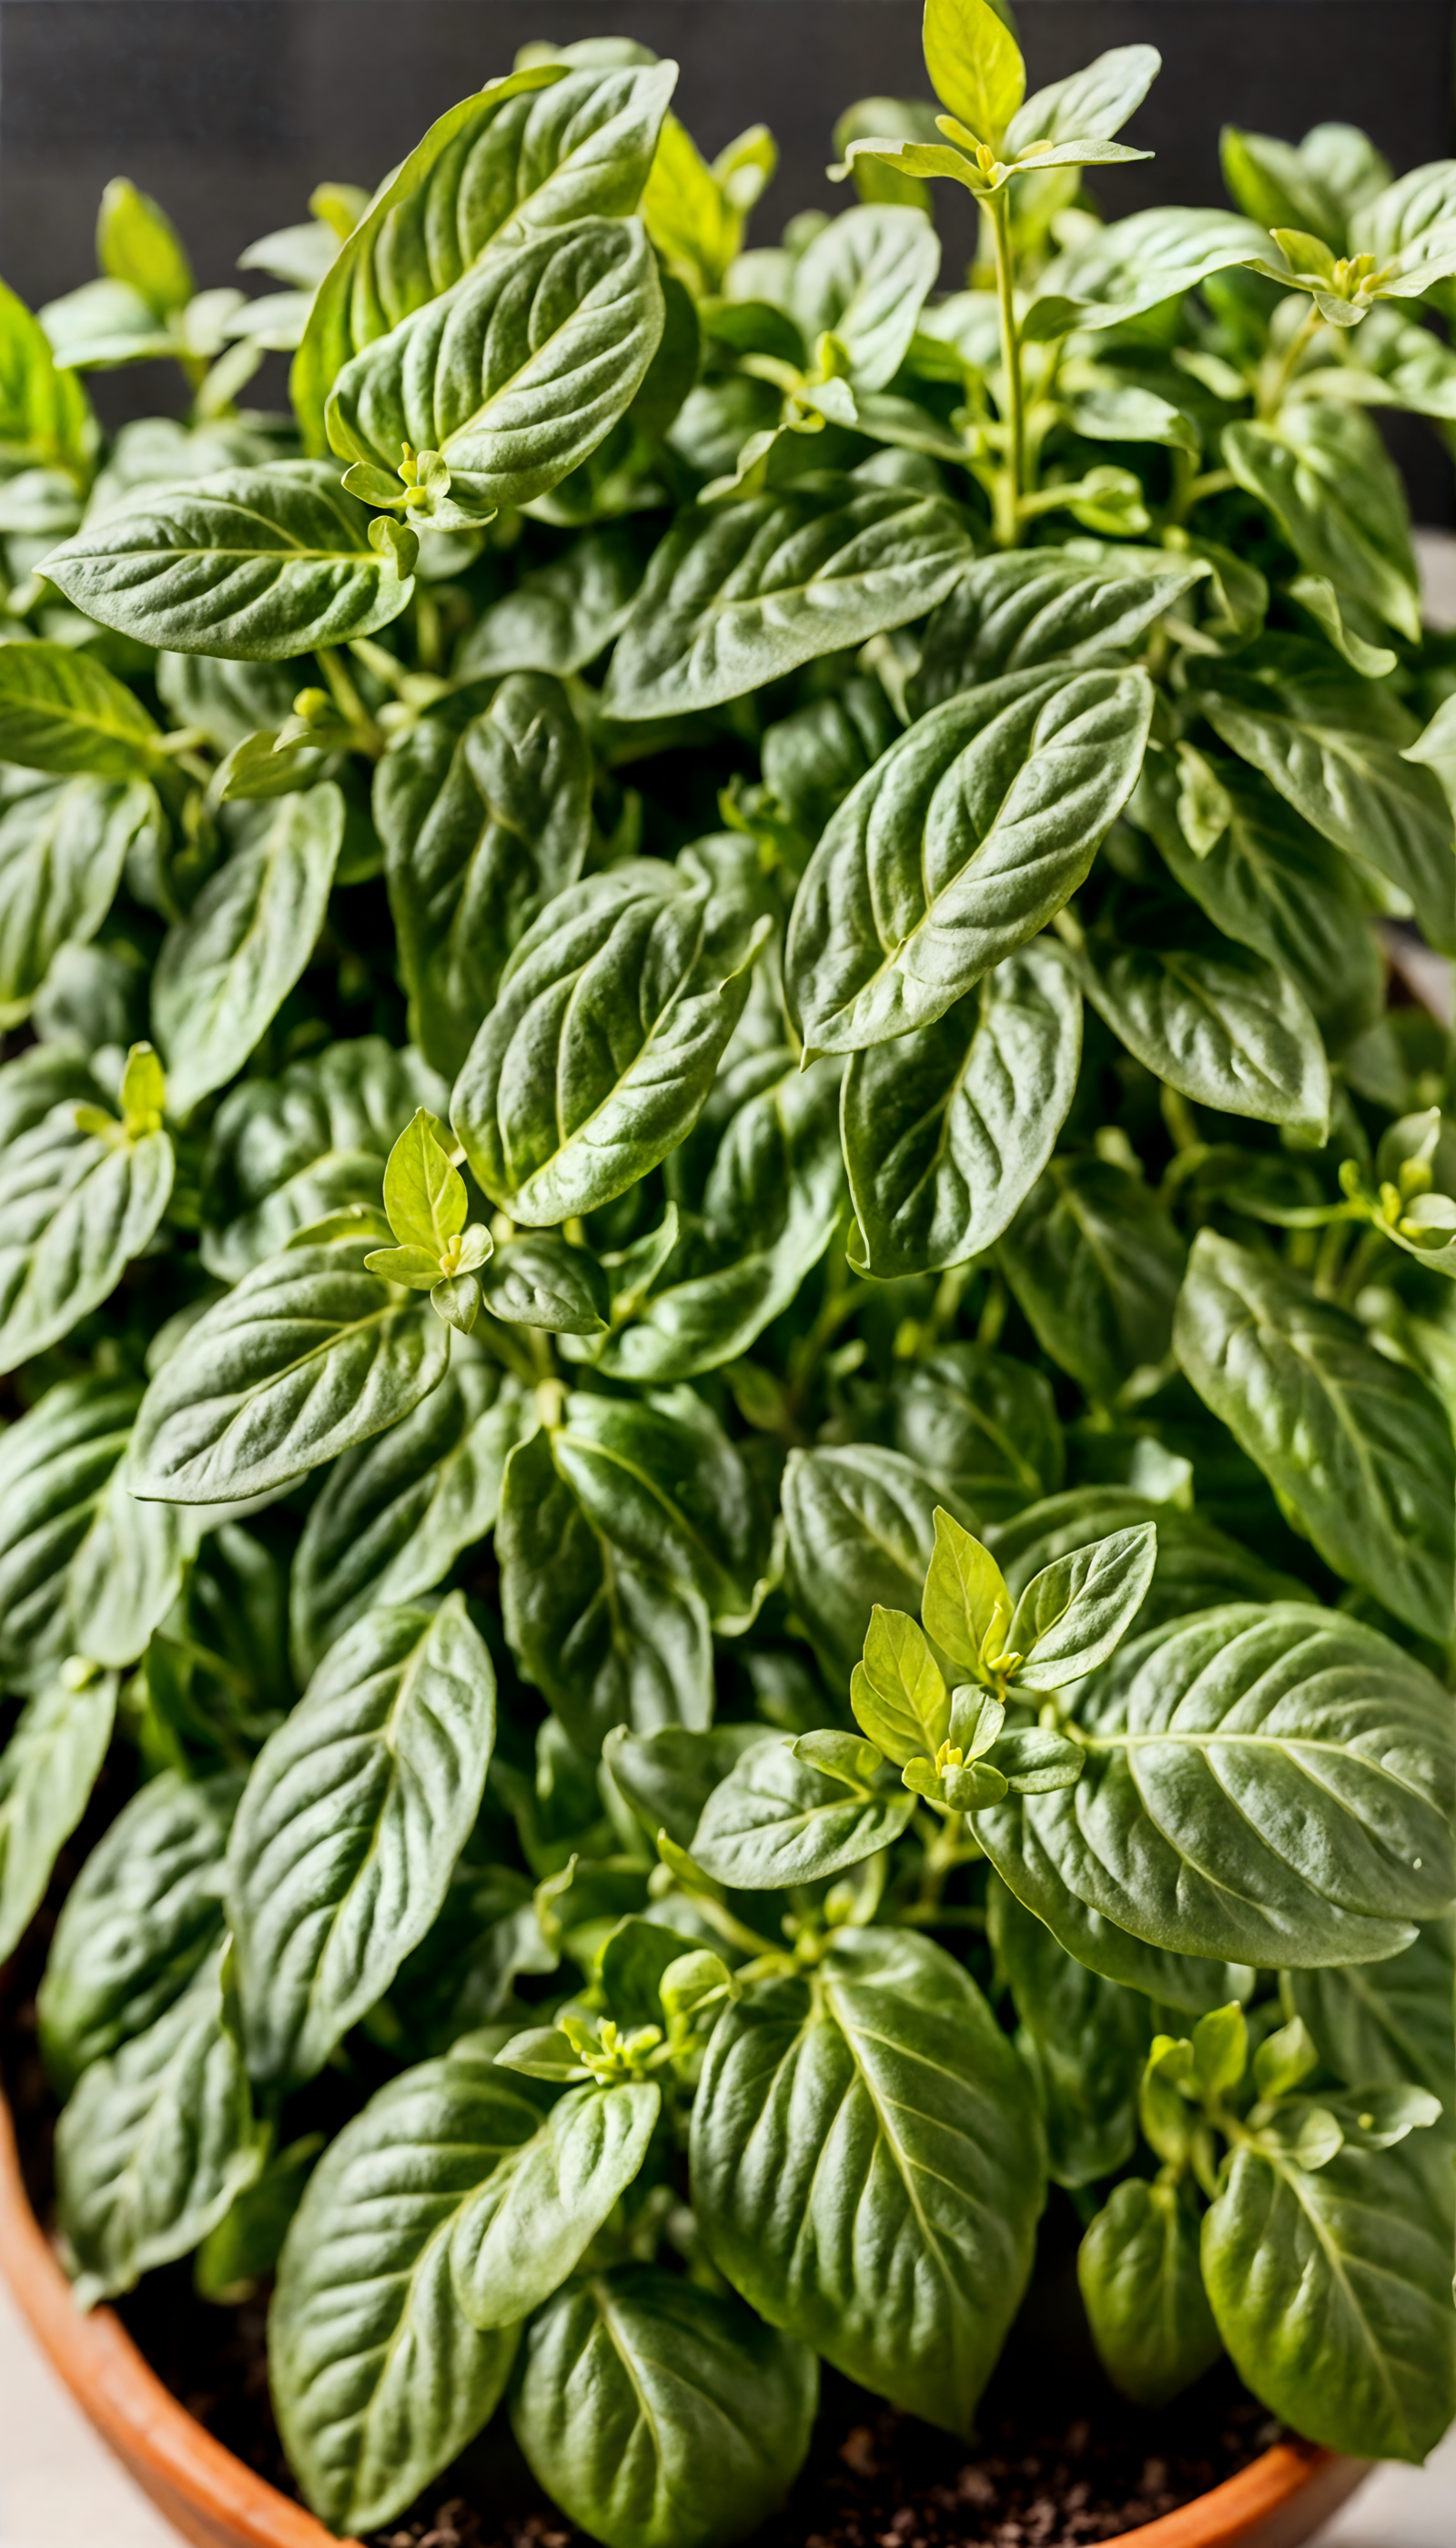 Potted Ocimum basilicum (basil) with vibrant green leaves, in a bowl against a dark background, clear indoor lighting.